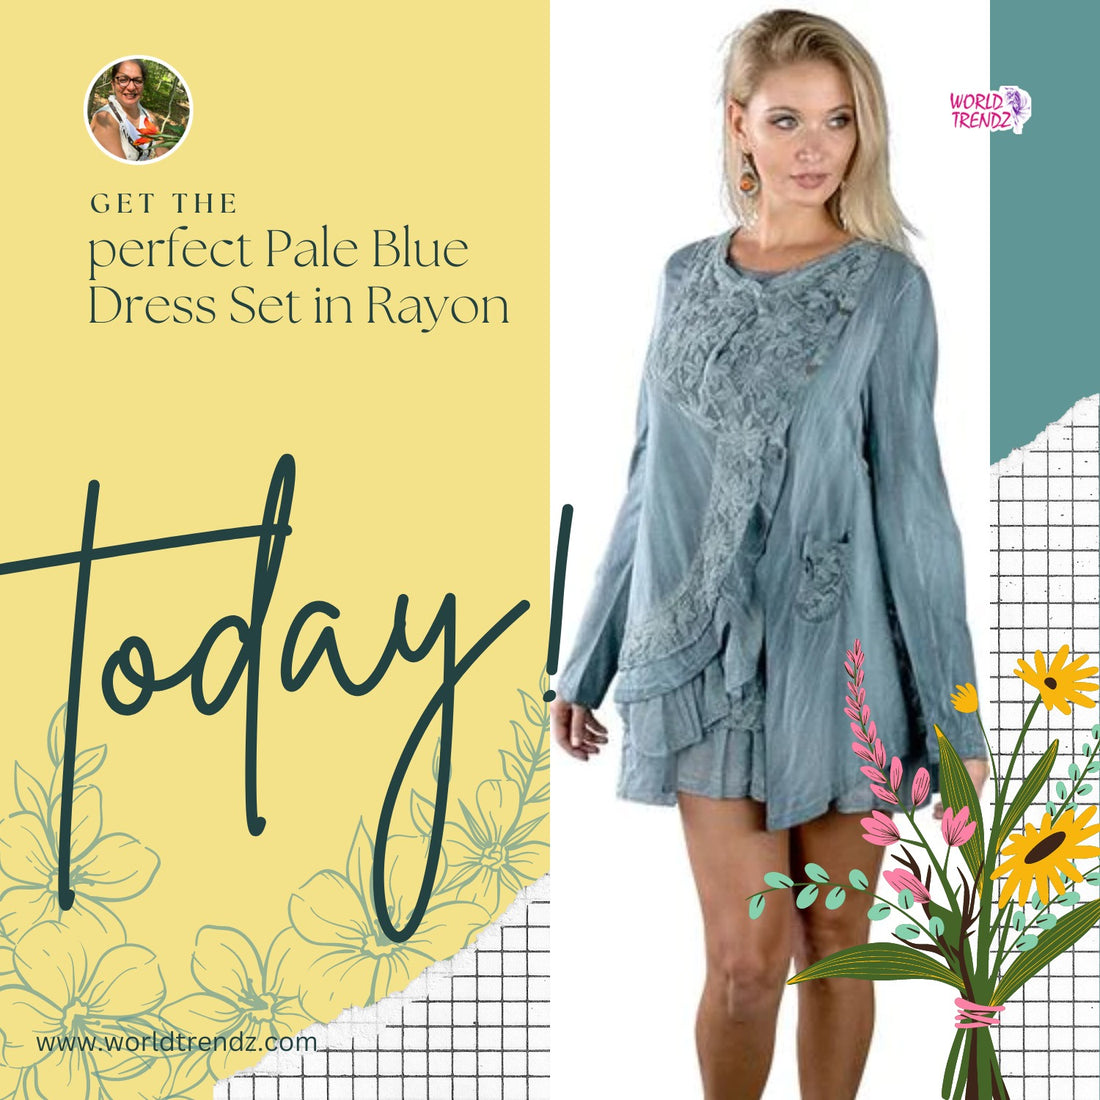 Step into Style with the Pale Blue Rayon Dress Set